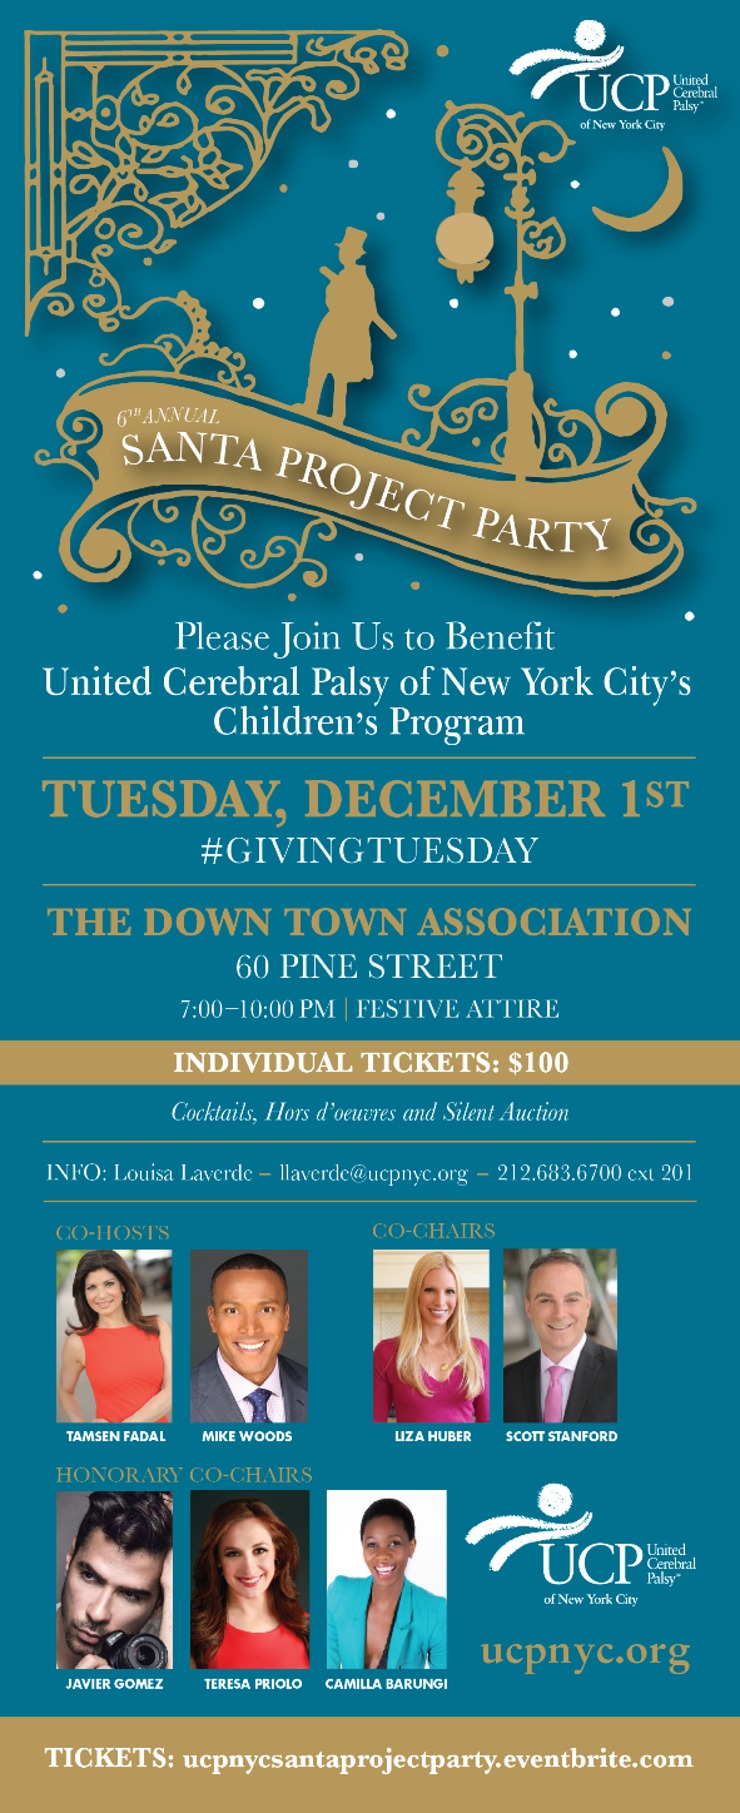 UCP of NYC's 2015 Santa Project Party